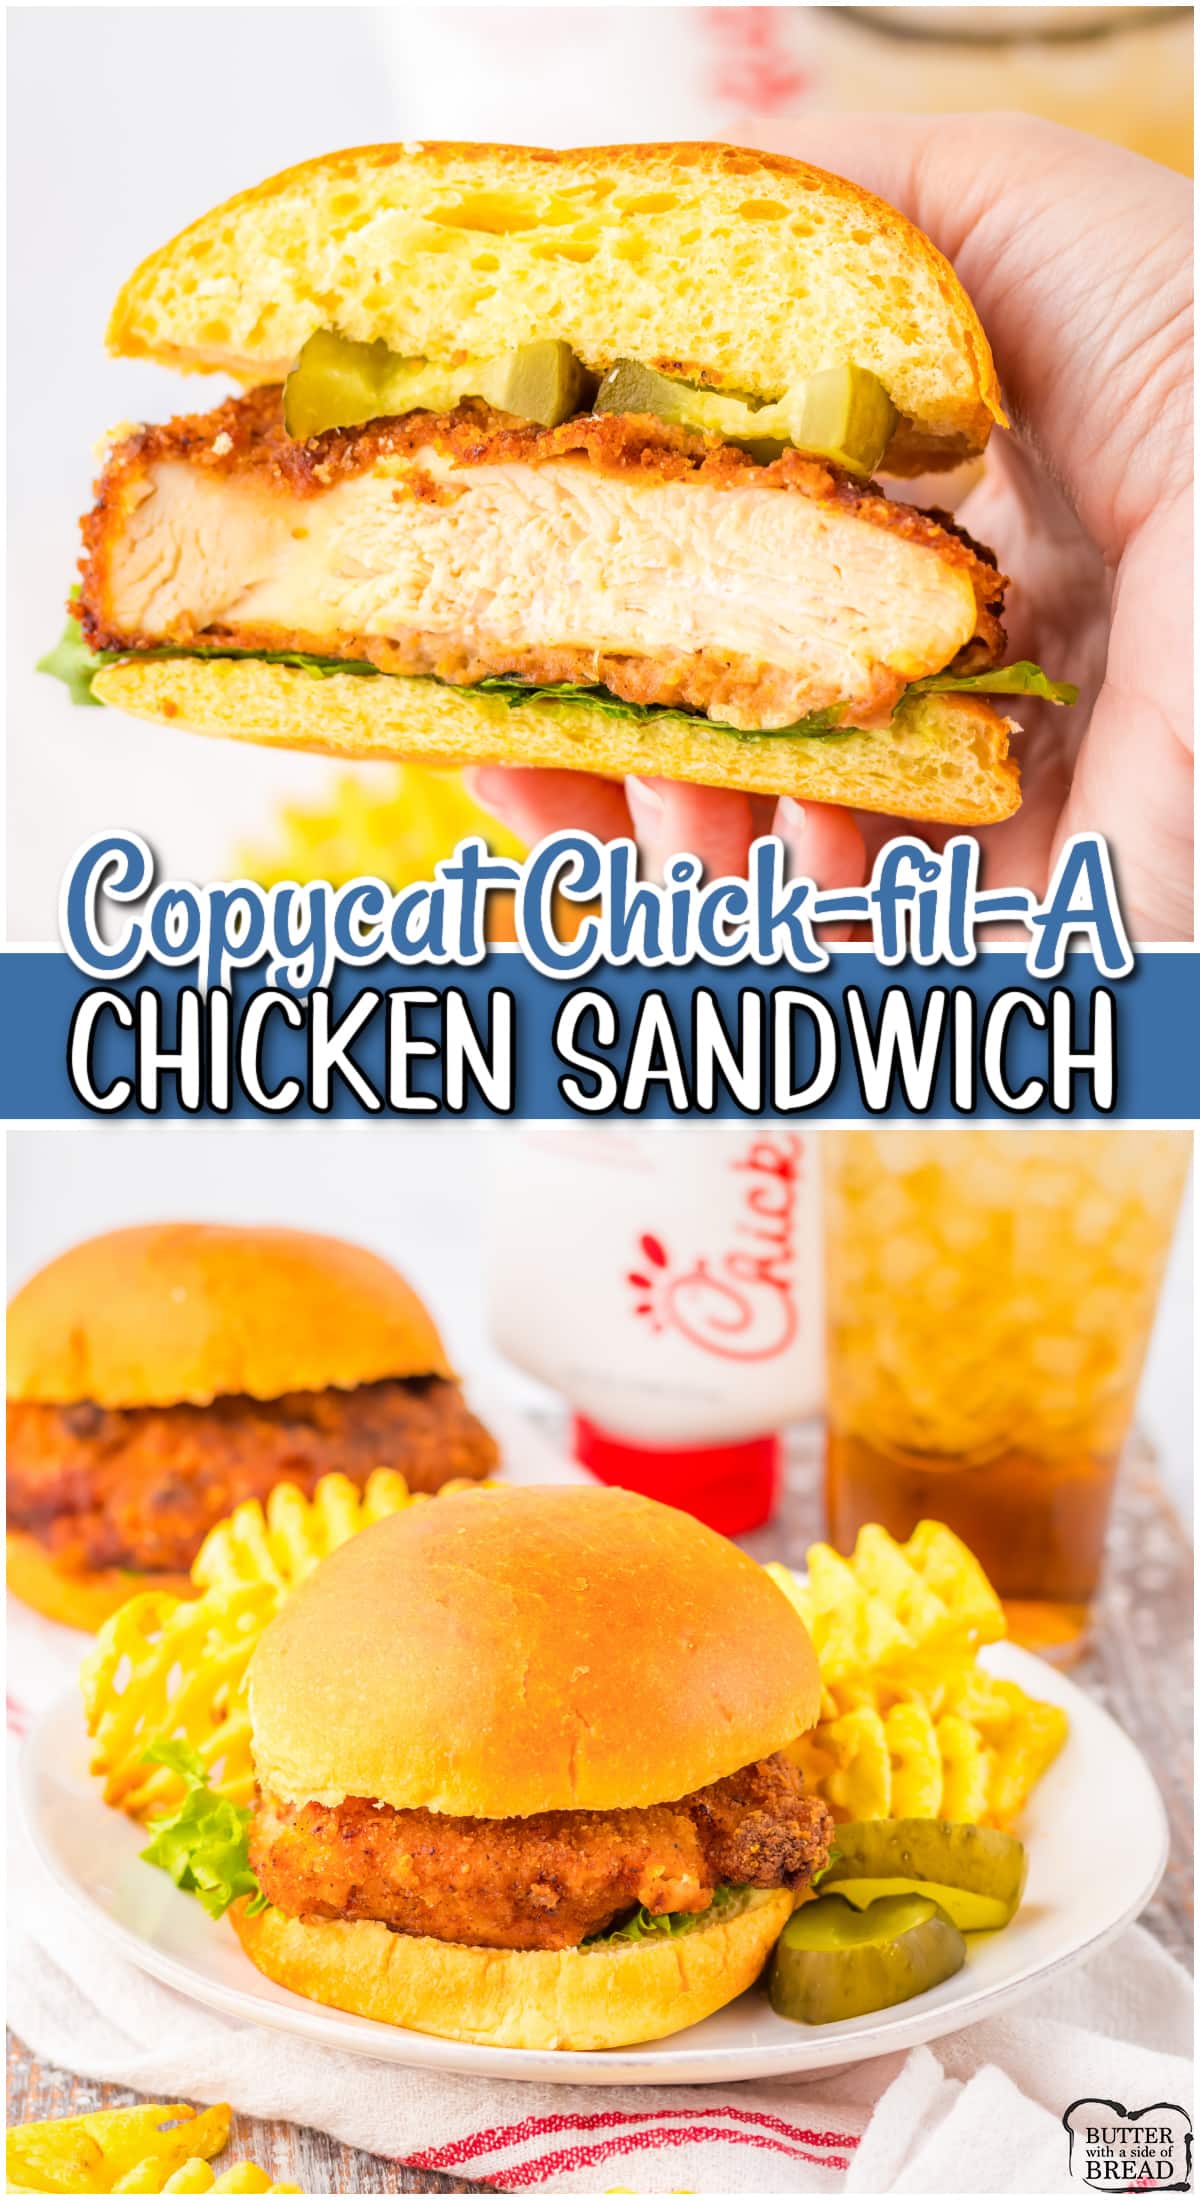 Copycat Chick-fil-A Sandwiches made with 4 secret ingredients that make them taste just like the original!! Tender, flavorful chicken cutlets breaded and fried, then made into the best crispy chicken sandwich ever!